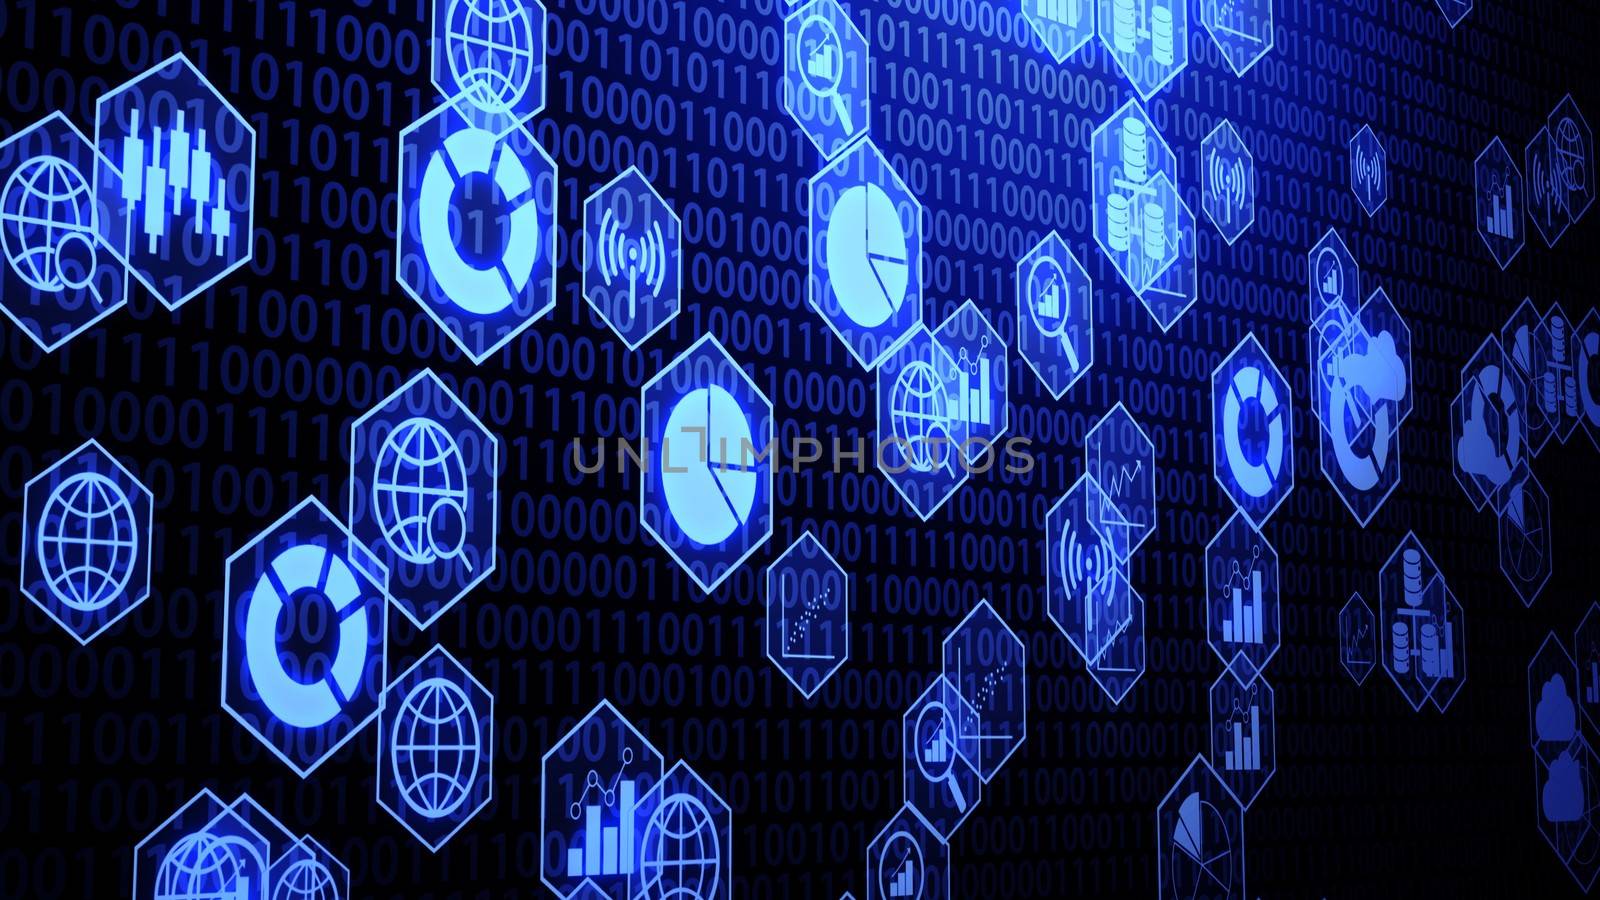 Big Data Icon Set in Hexagon Border Hovering on The Randoming Binary Code Background with Blue Lighting ver.2 by ariya23156